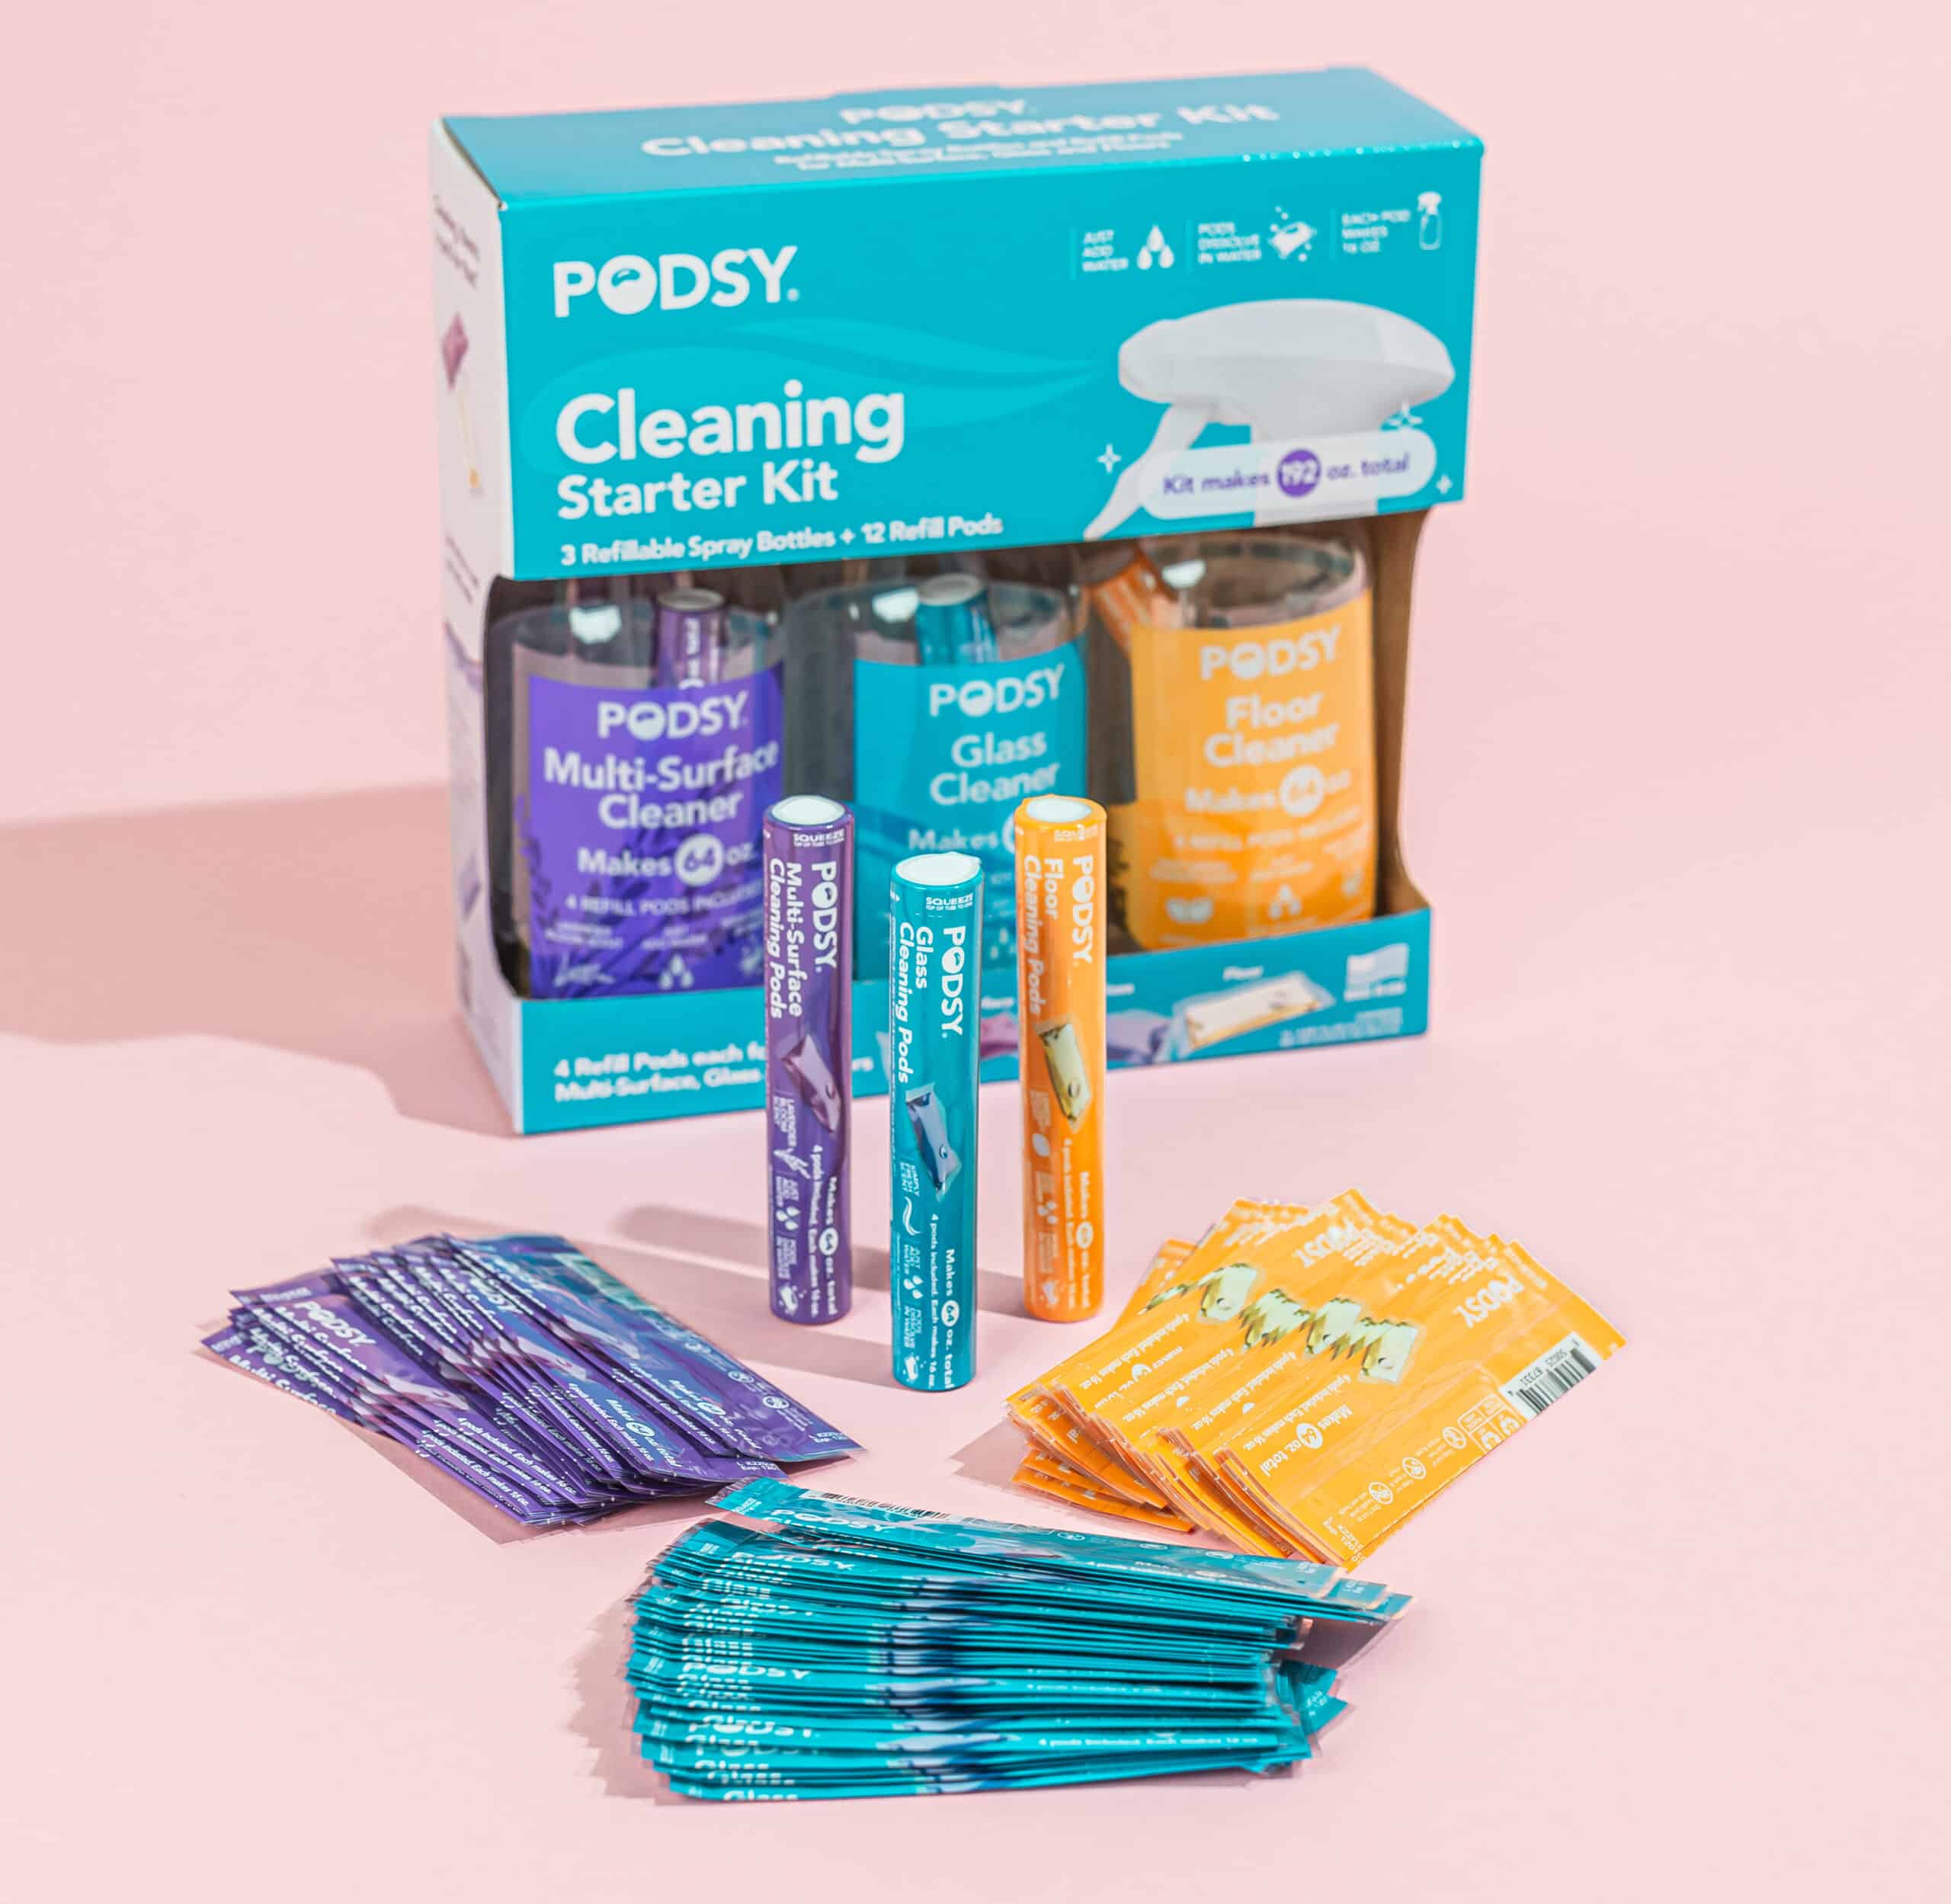 Cleaning Starter Kit – Podsy